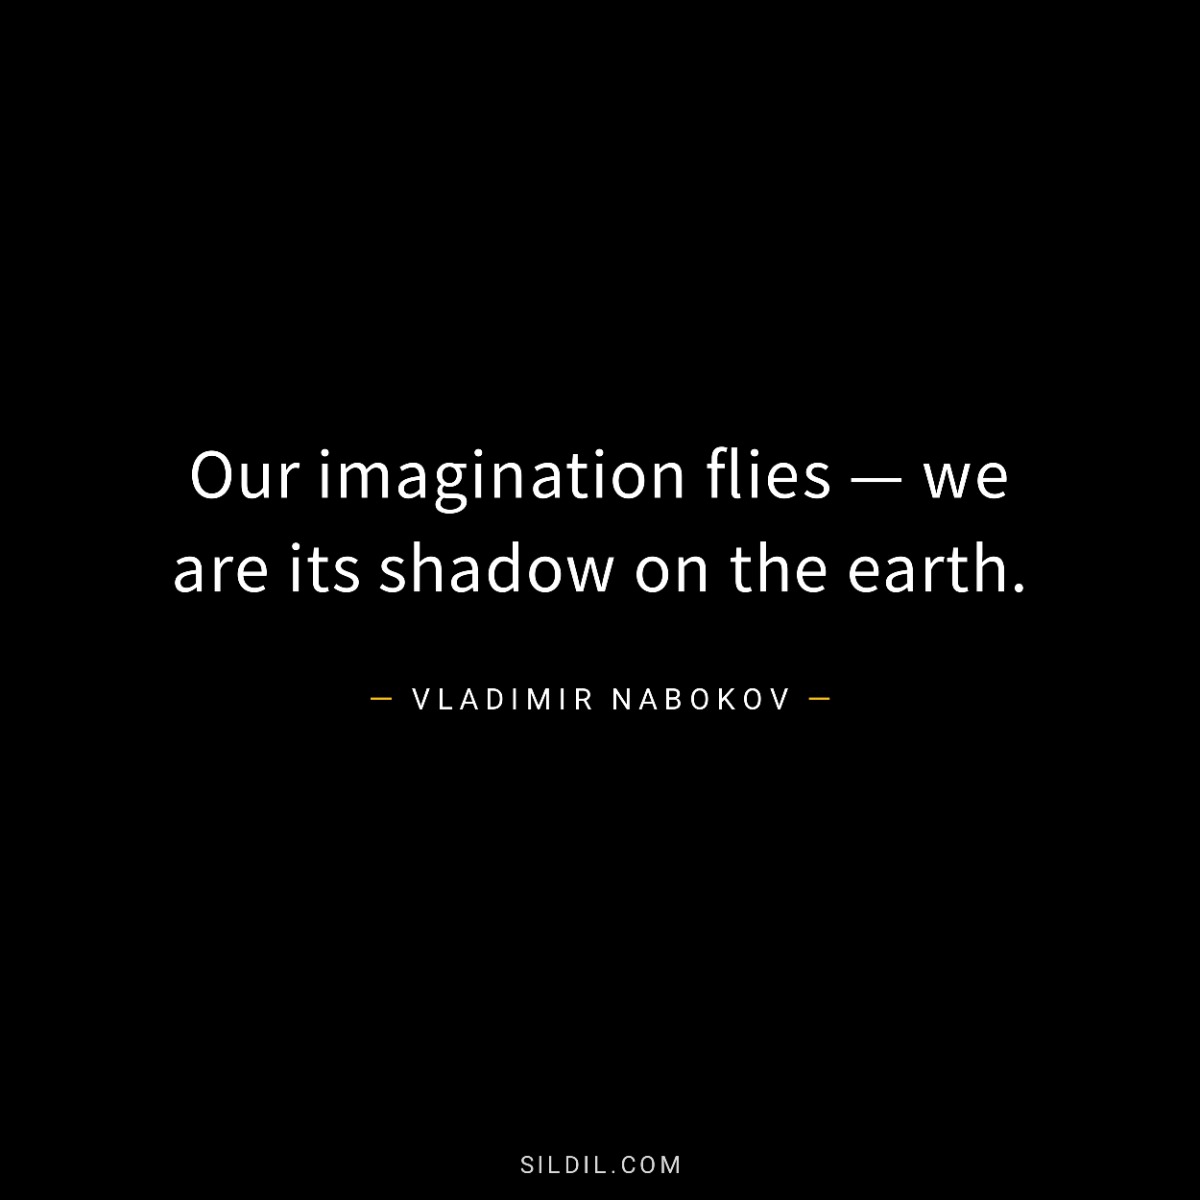 Our imagination flies — we are its shadow on the earth.